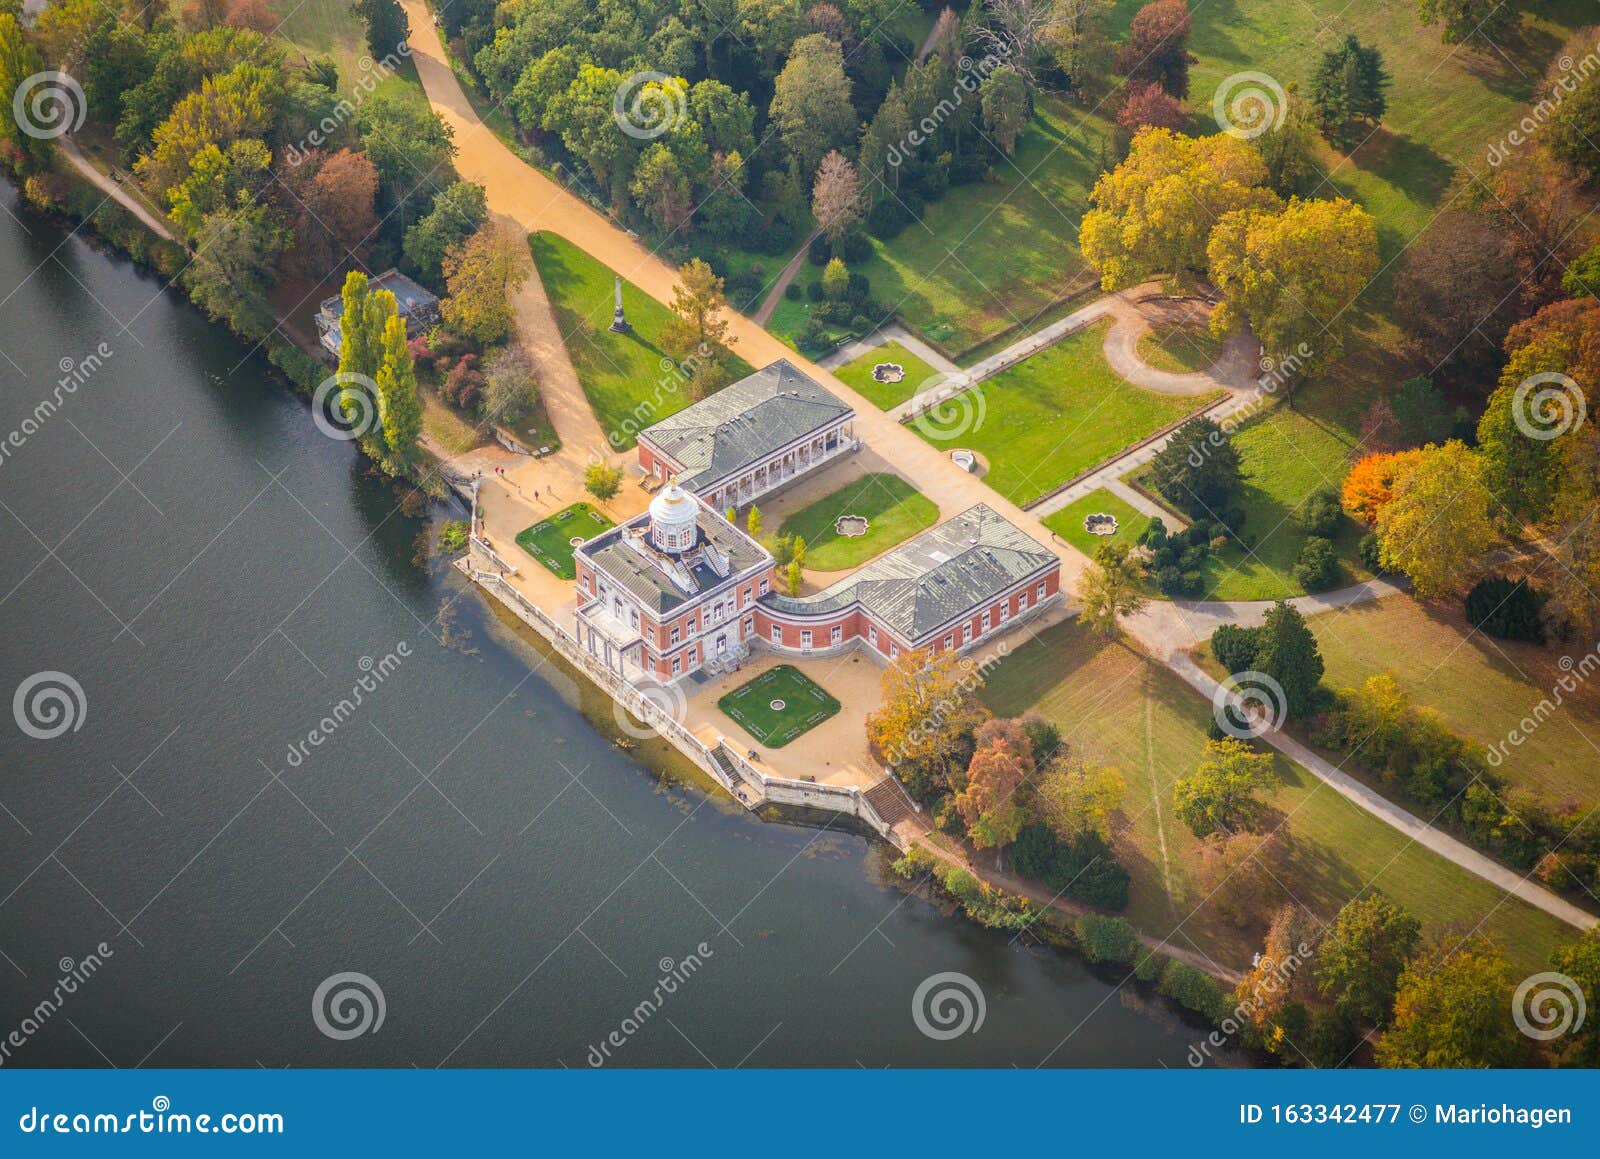 potsdam marble palace, marmorpalais located at `holy lake` heiliger see in the new garden neuer garten